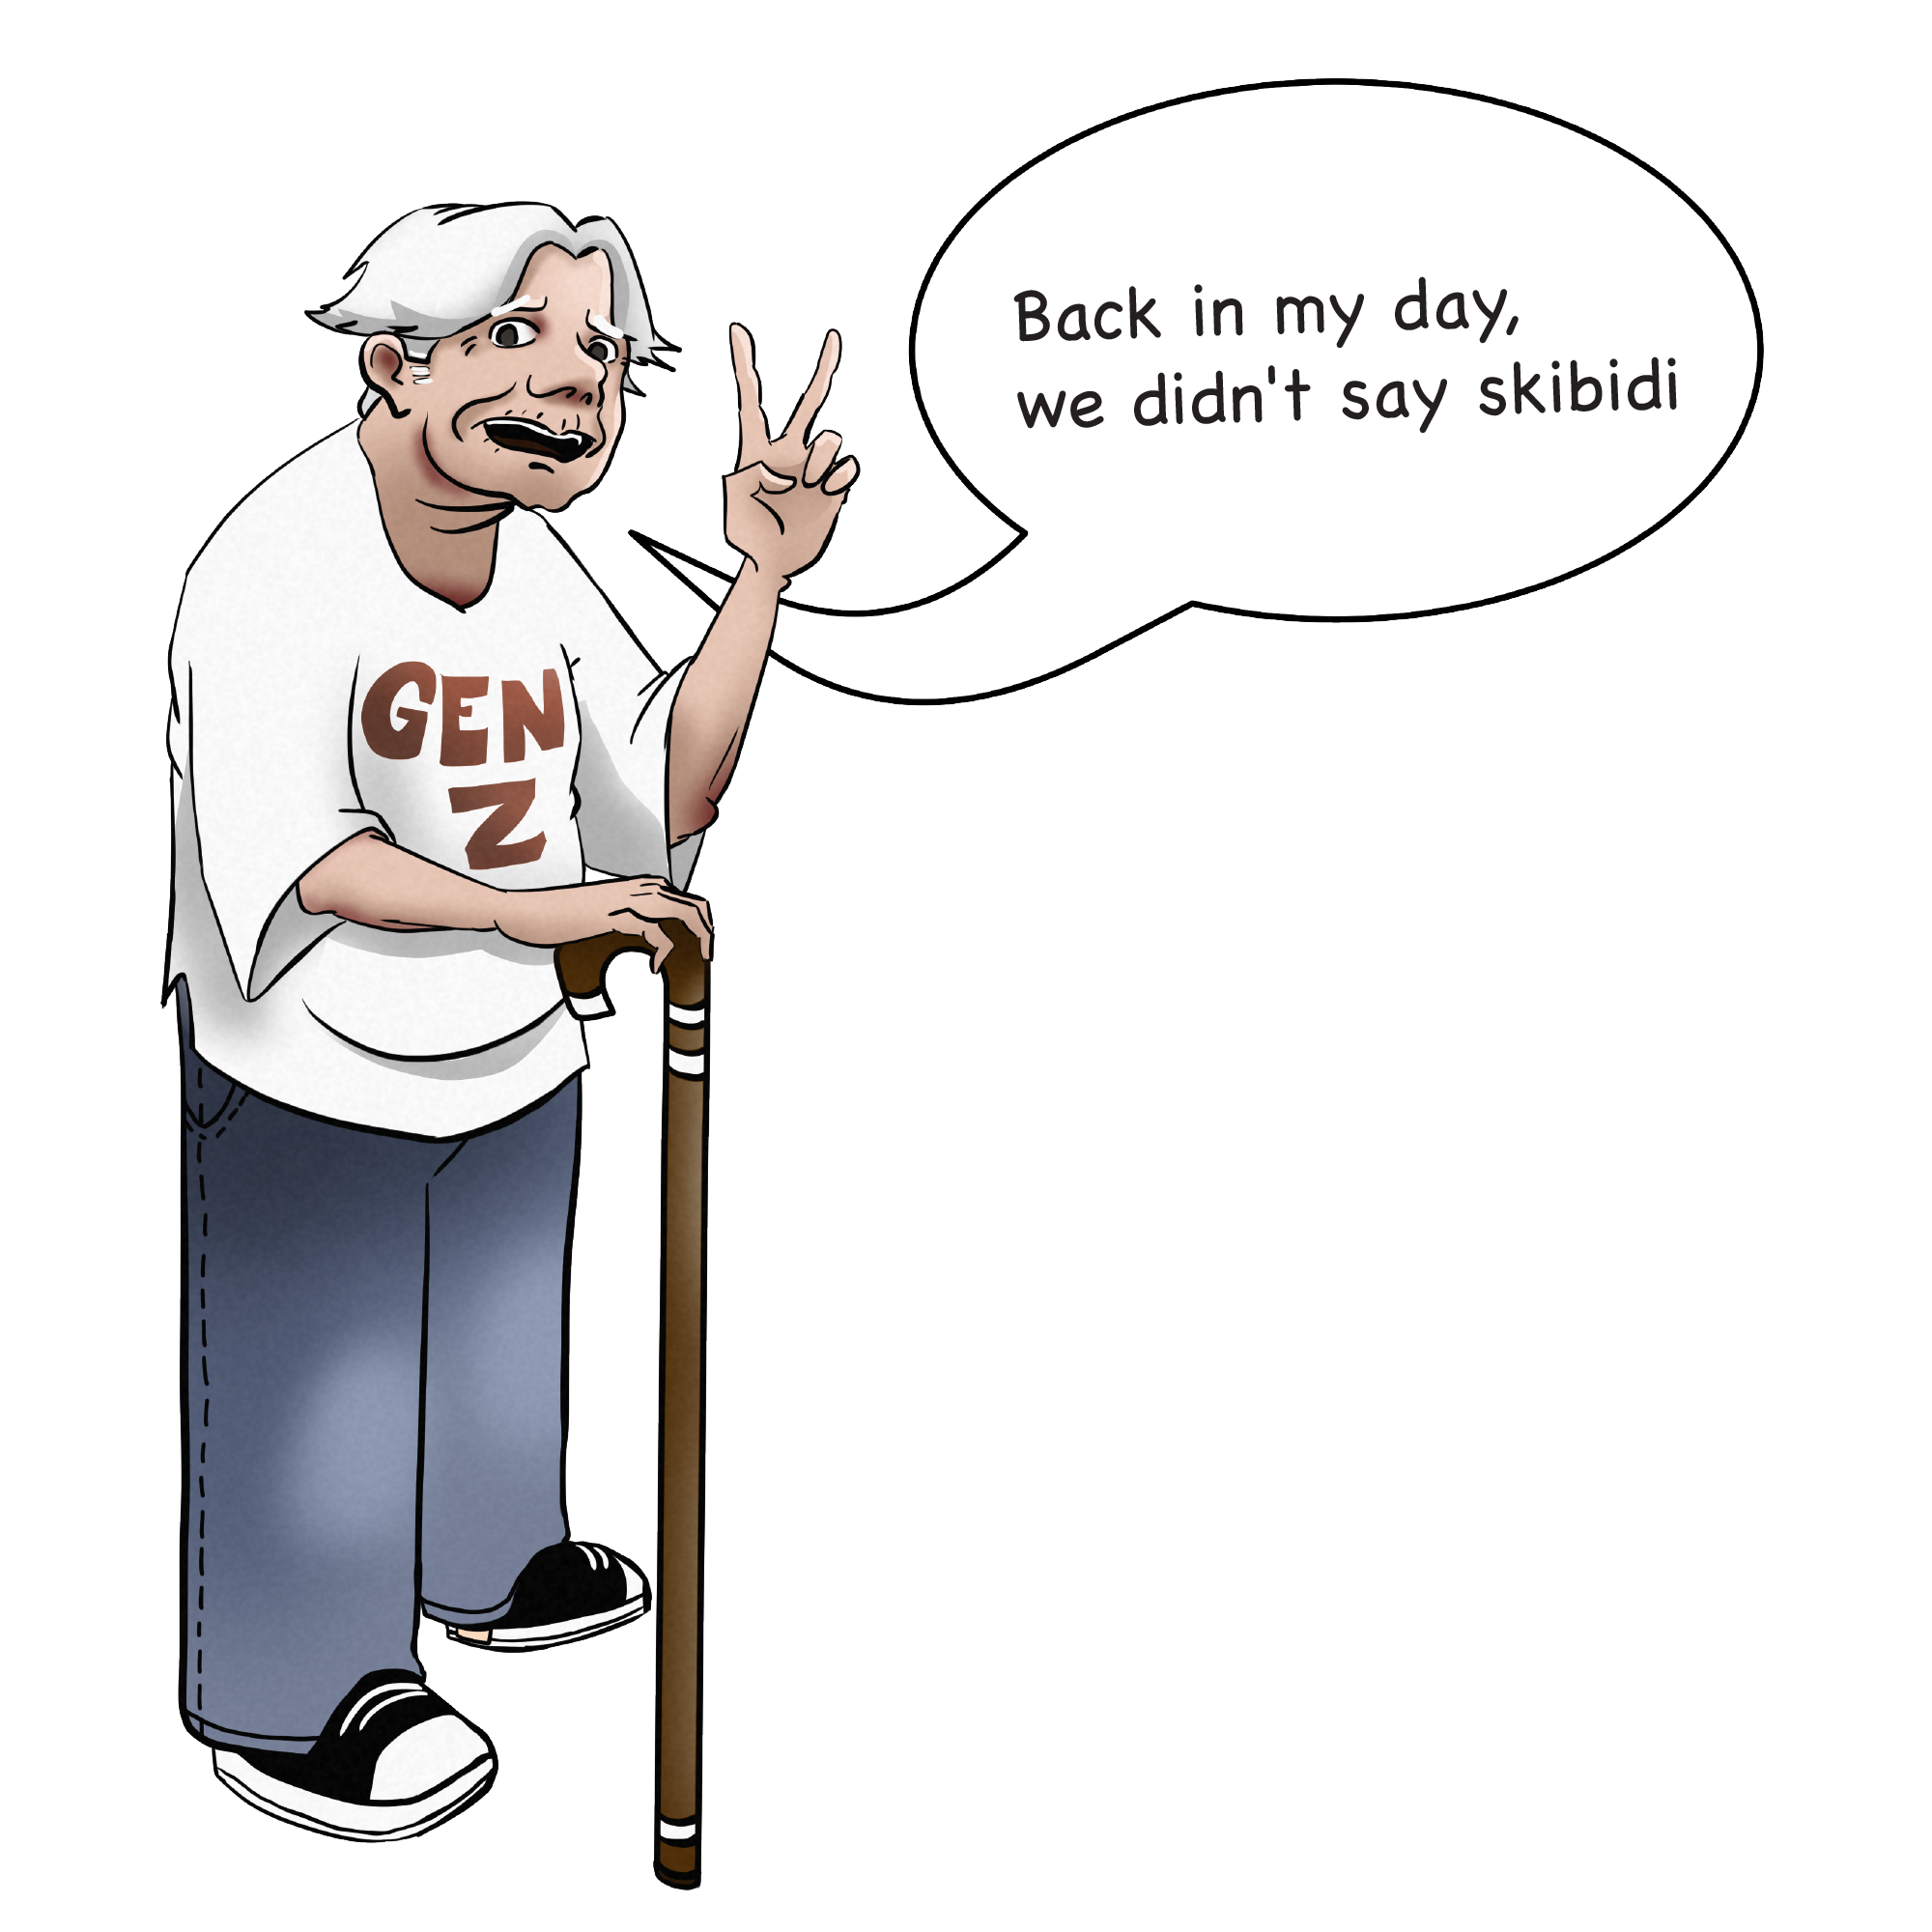 Elderly person with a middle part and a T-shirt that reads “Gen Z.” There’s a text bubble that reads “Back in my day, we didn’t say skibidi.”